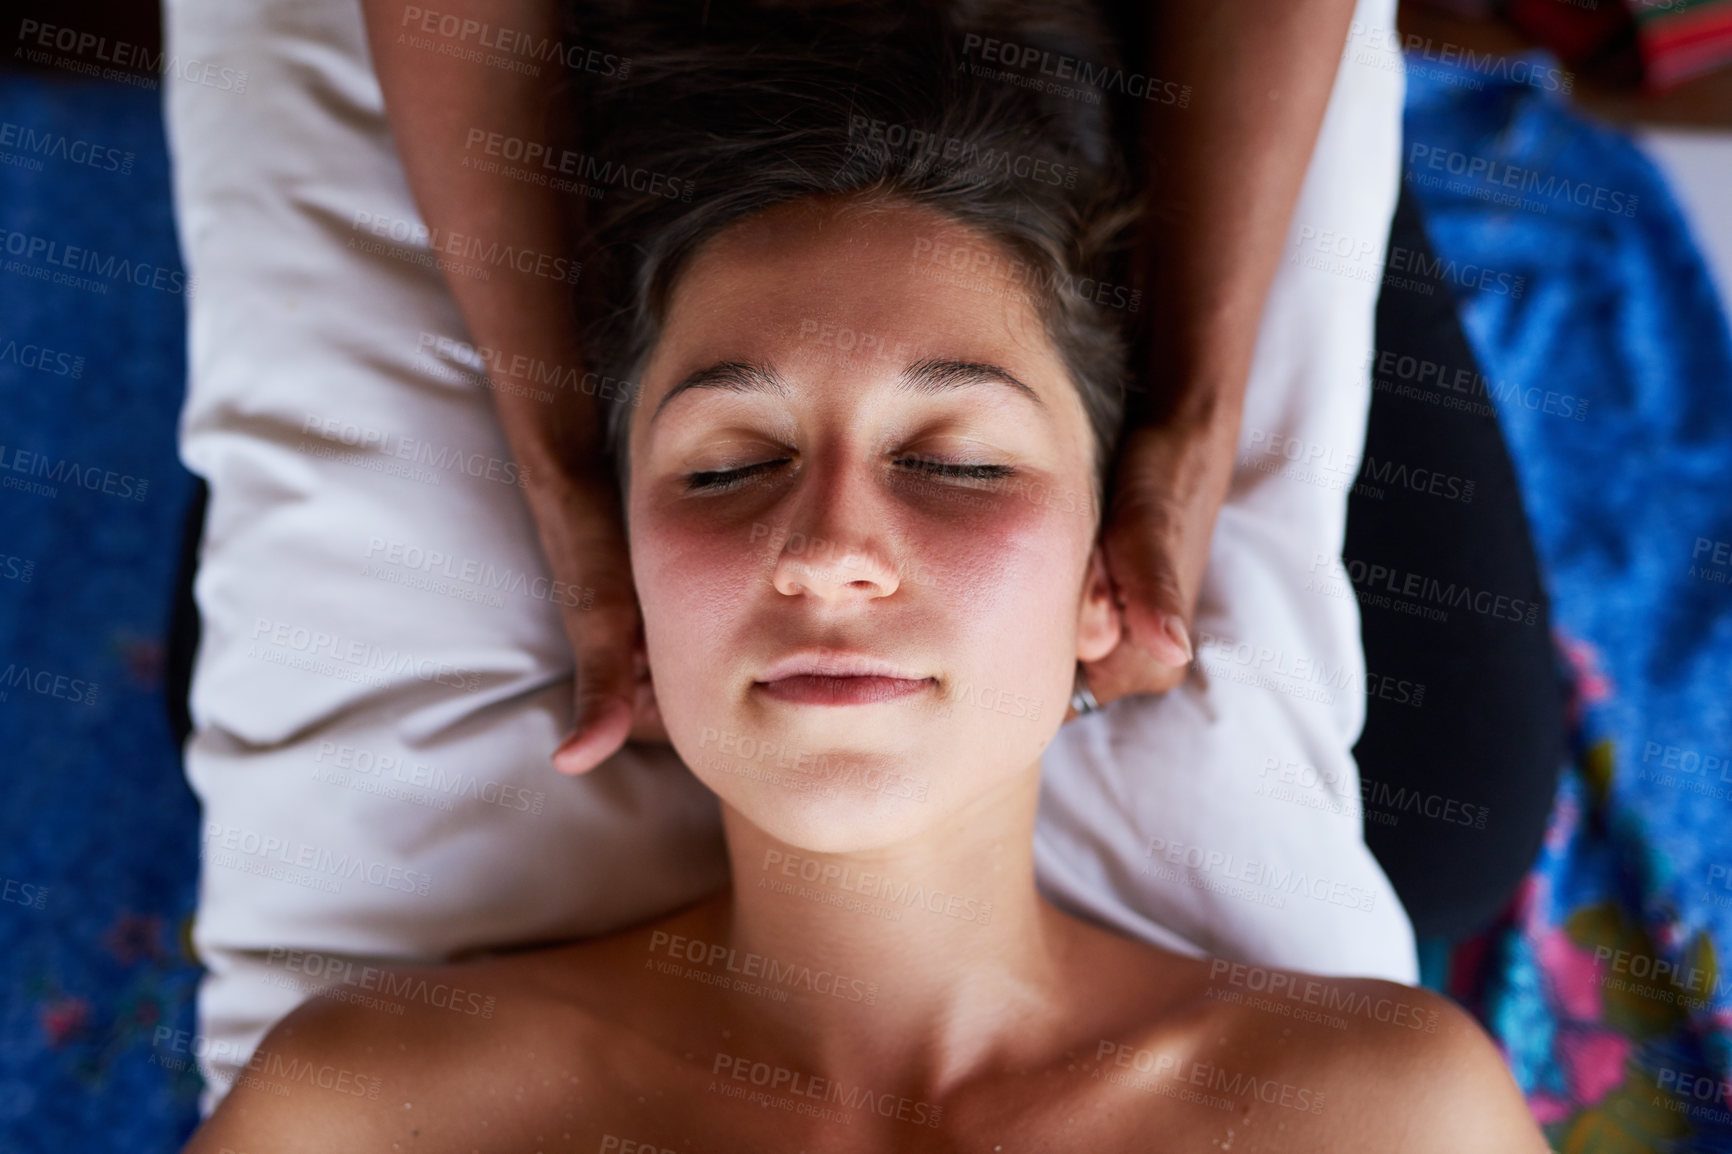 Buy stock photo High angle shot of a young woman getting a relaxing massage at the spa